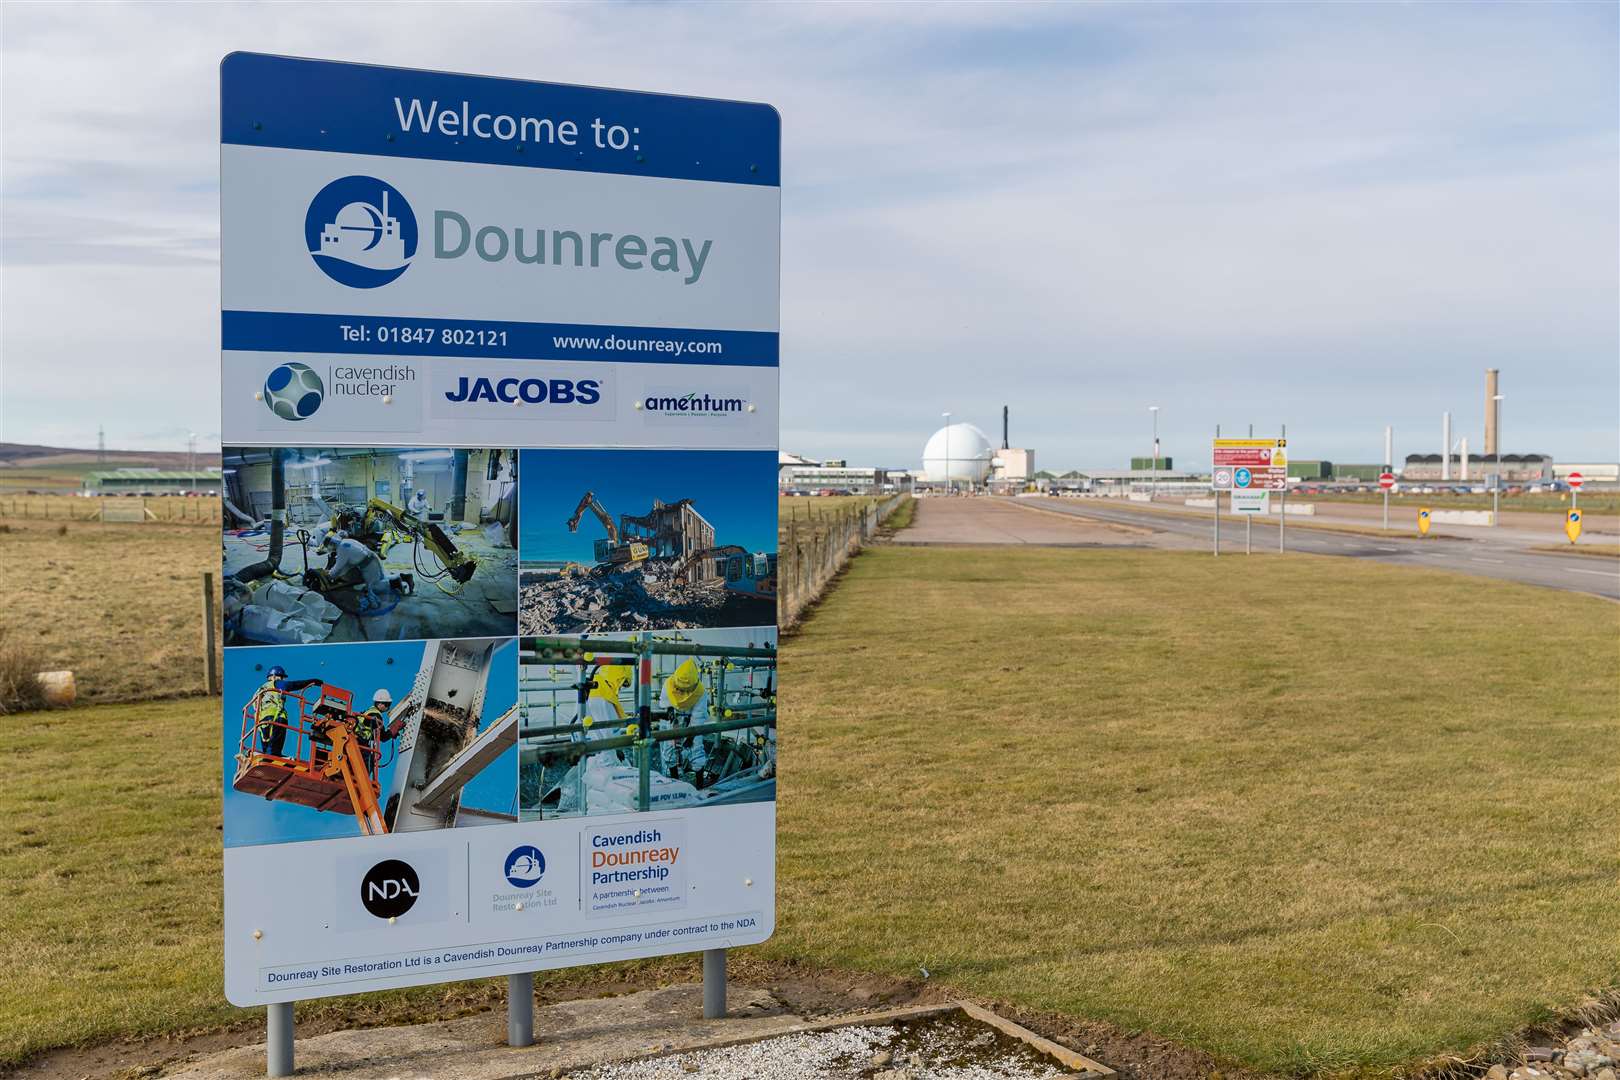 The Nuclear Decommissioning Authority will take over site operations at Dounreay from the Cavendish Dounreay Partnership. Picture: DSRL / NDA